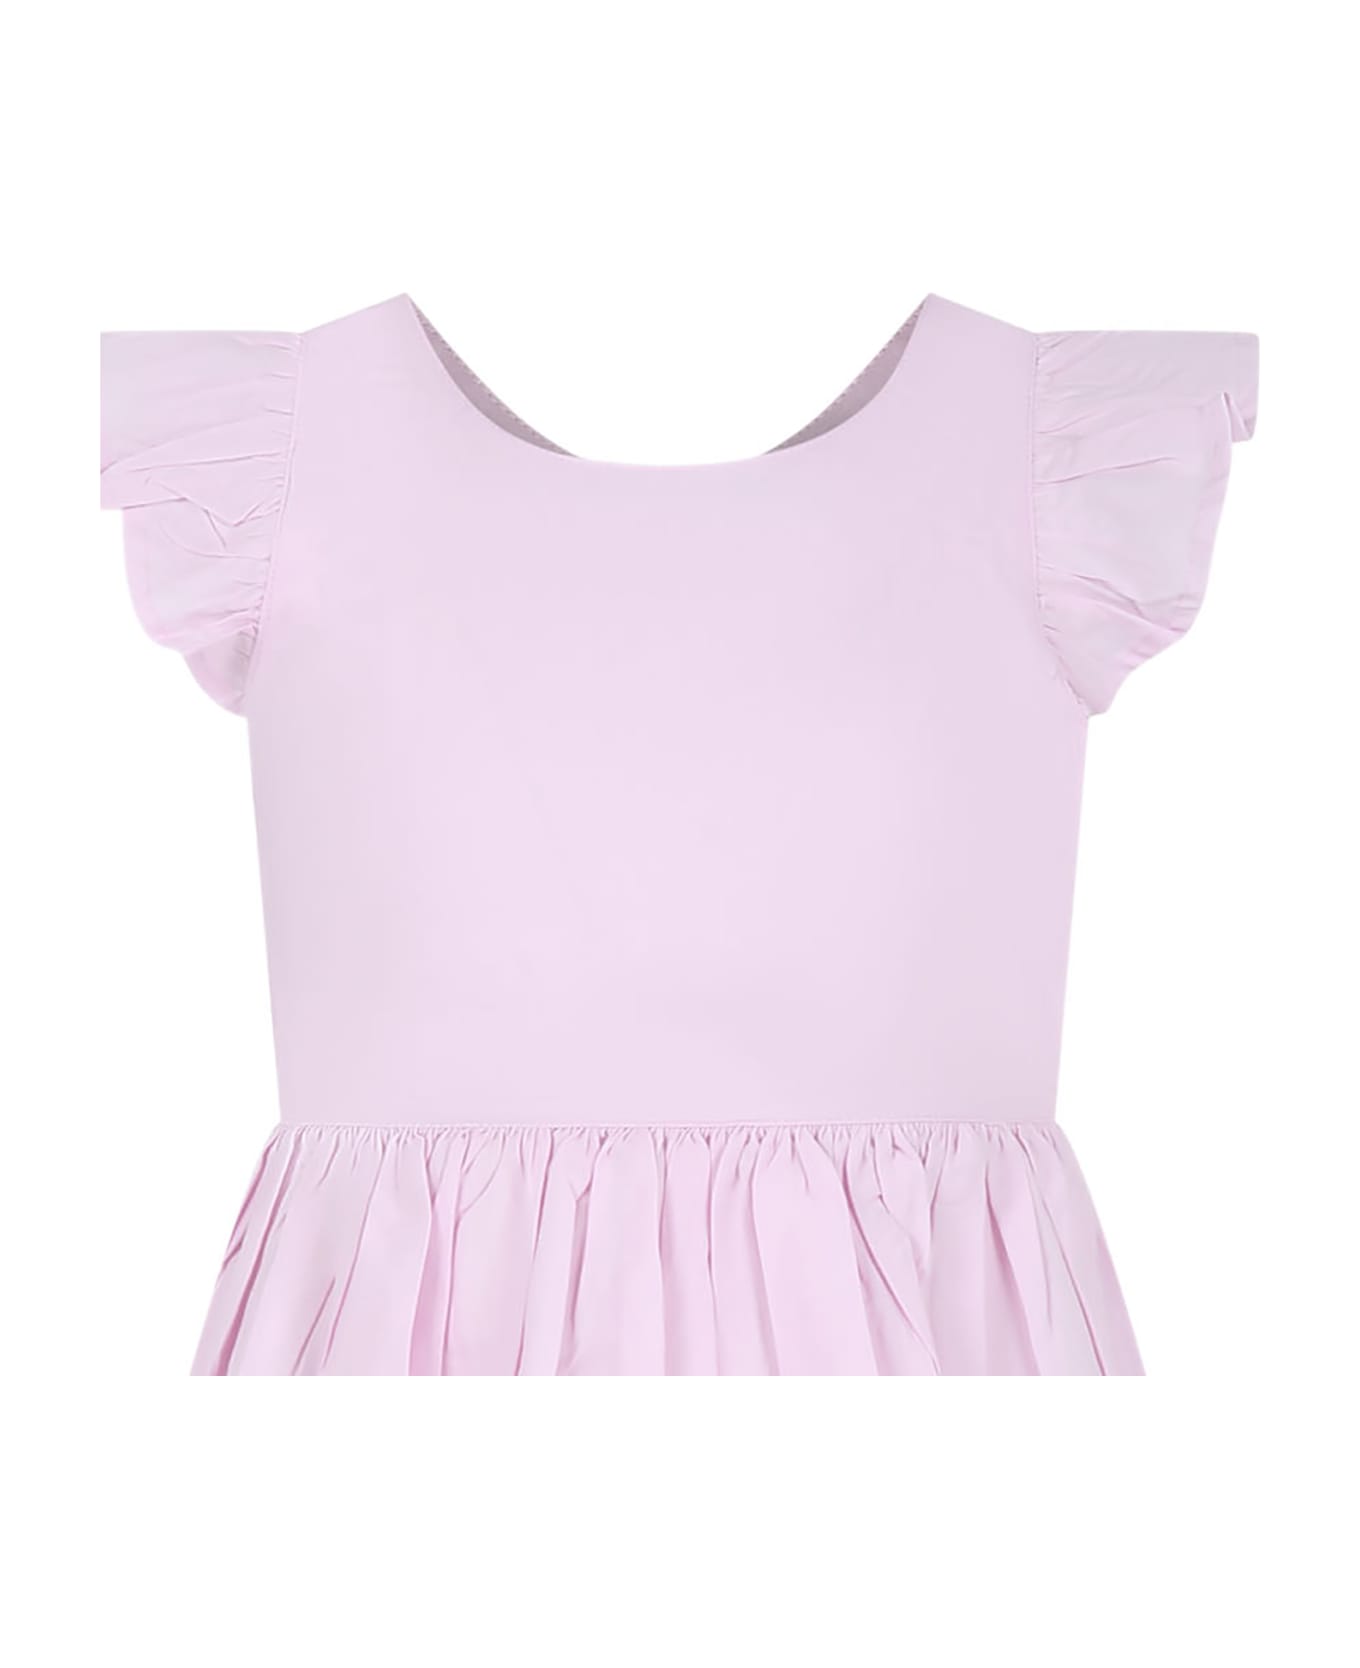 Molo Pink Dress For Girl - Pink